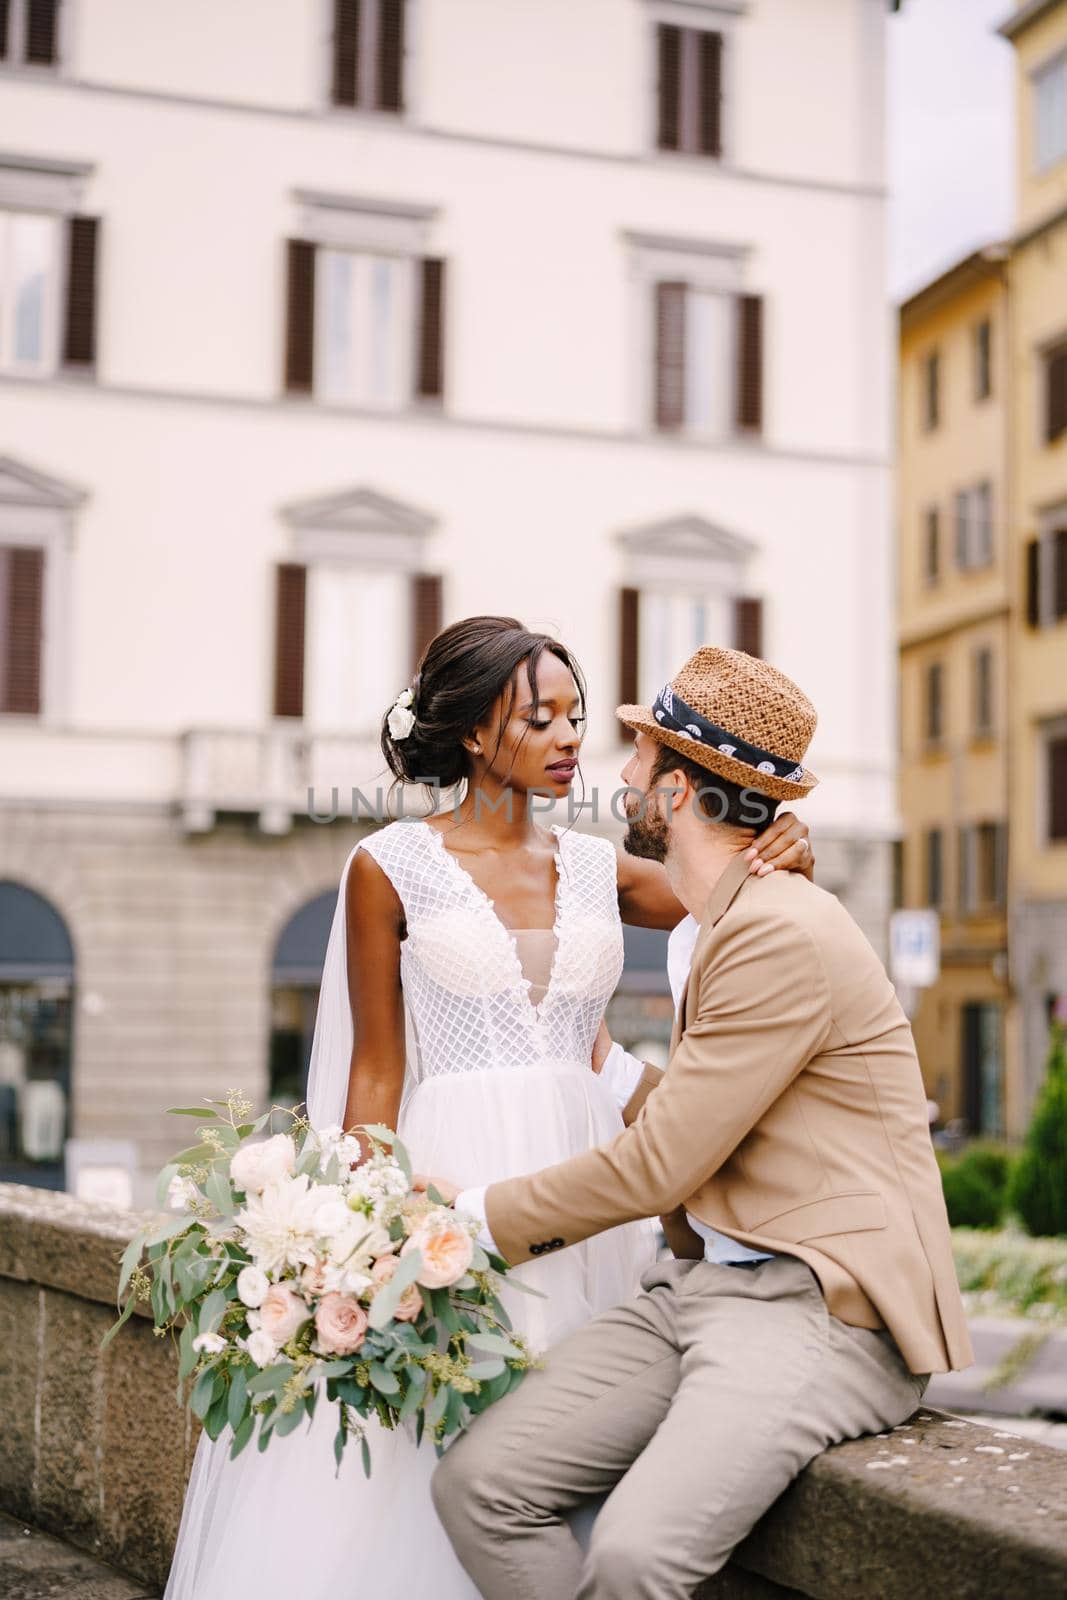 Multiethnic wedding couple. Wedding in Florence, Italy. African-American bride in a white dress with a long veil and a bouquet, and Caucasian groom in a sandy jacket and straw hat. by Nadtochiy